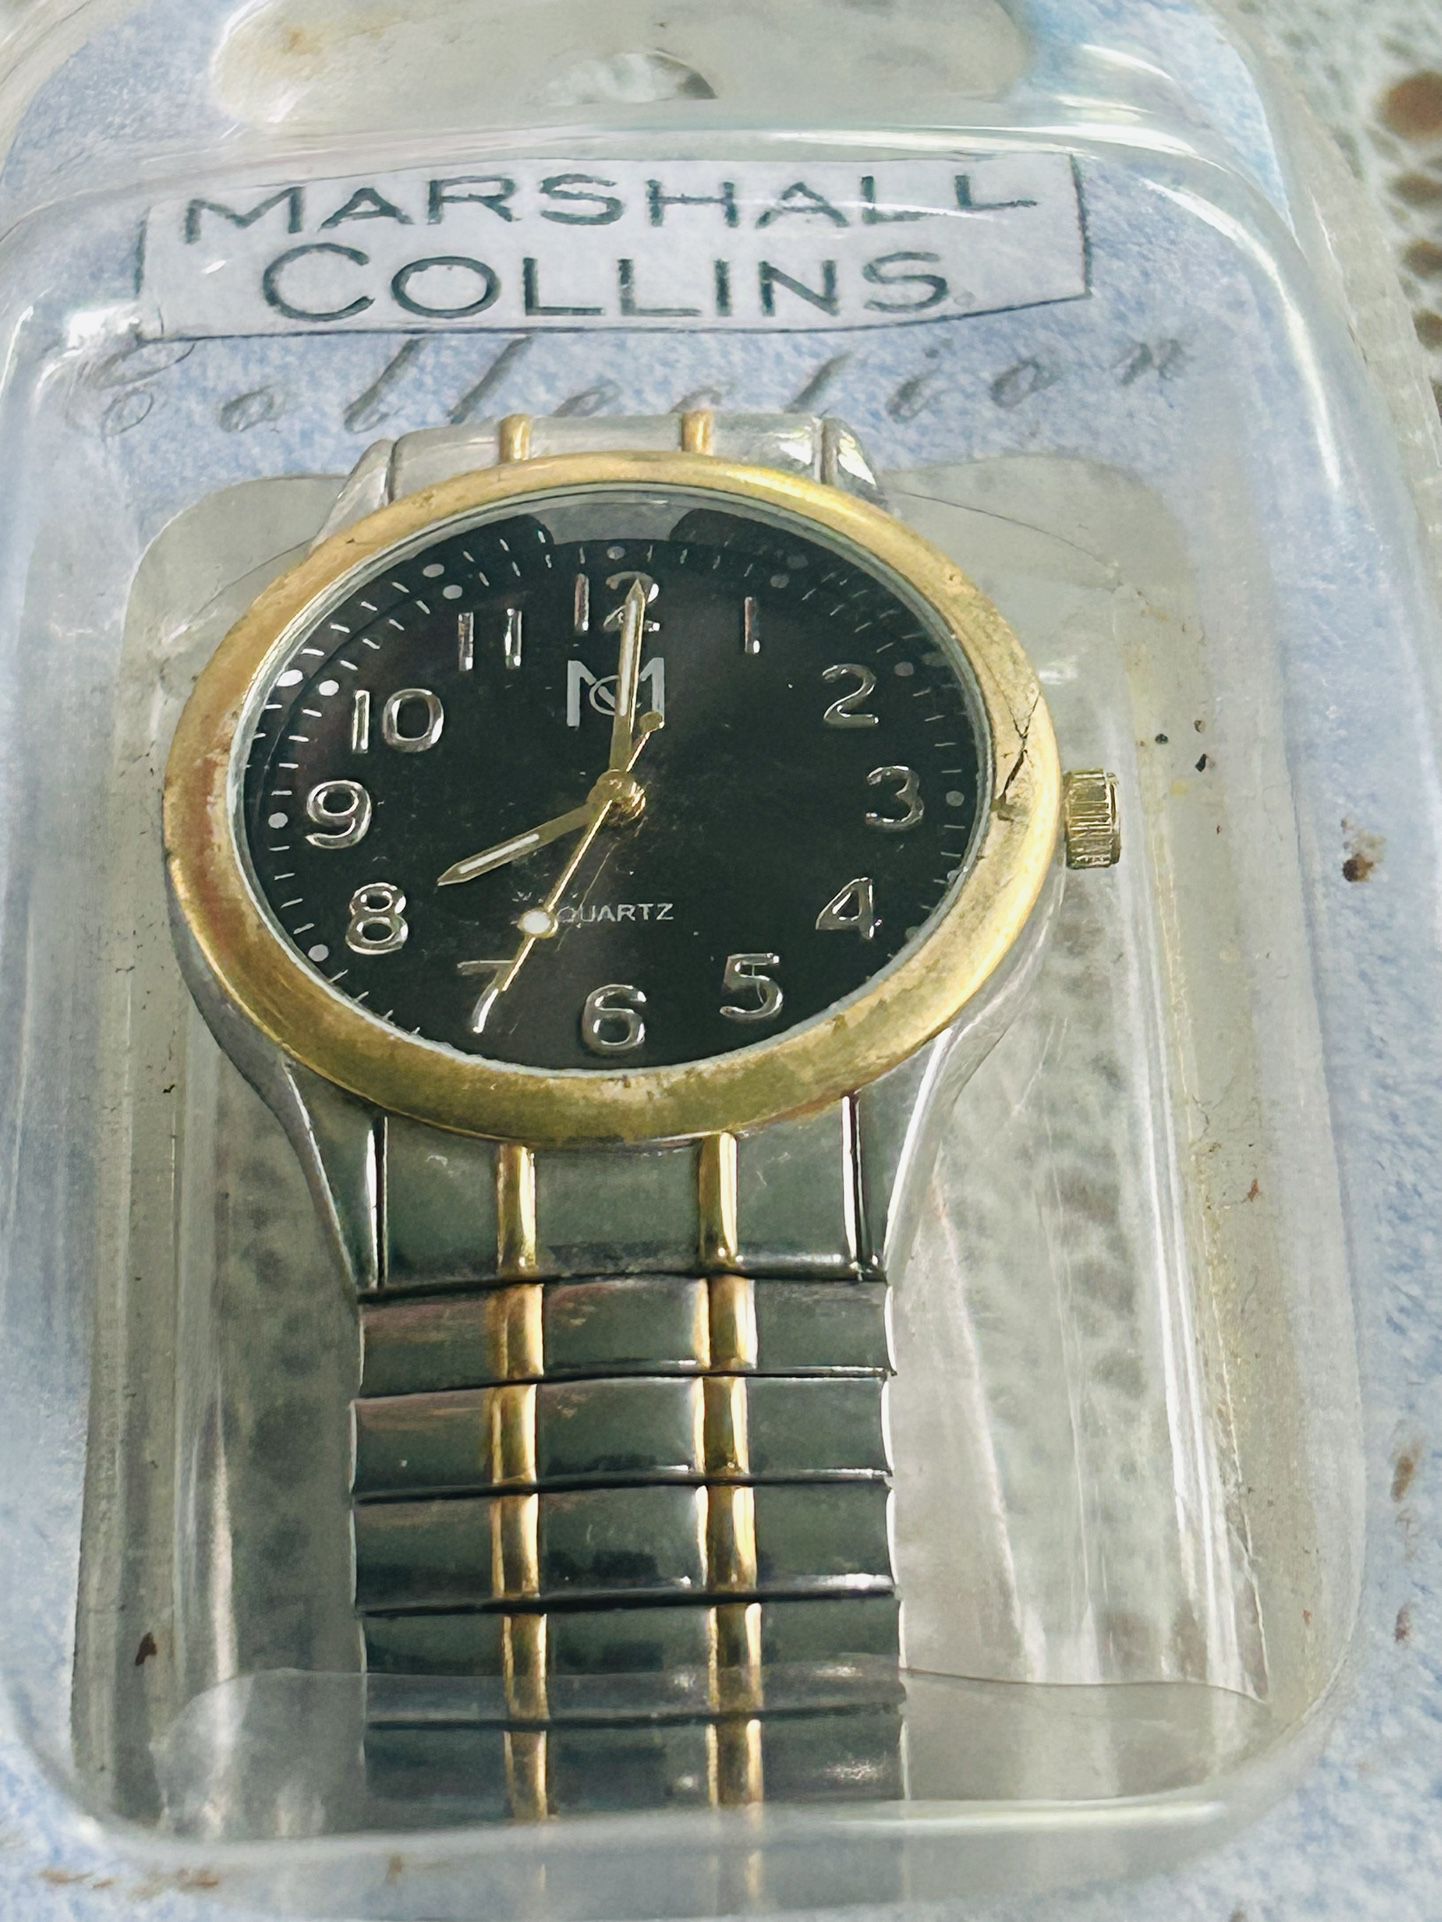 Marshall Collins Watch Brand New Long Life Battery Unopened 